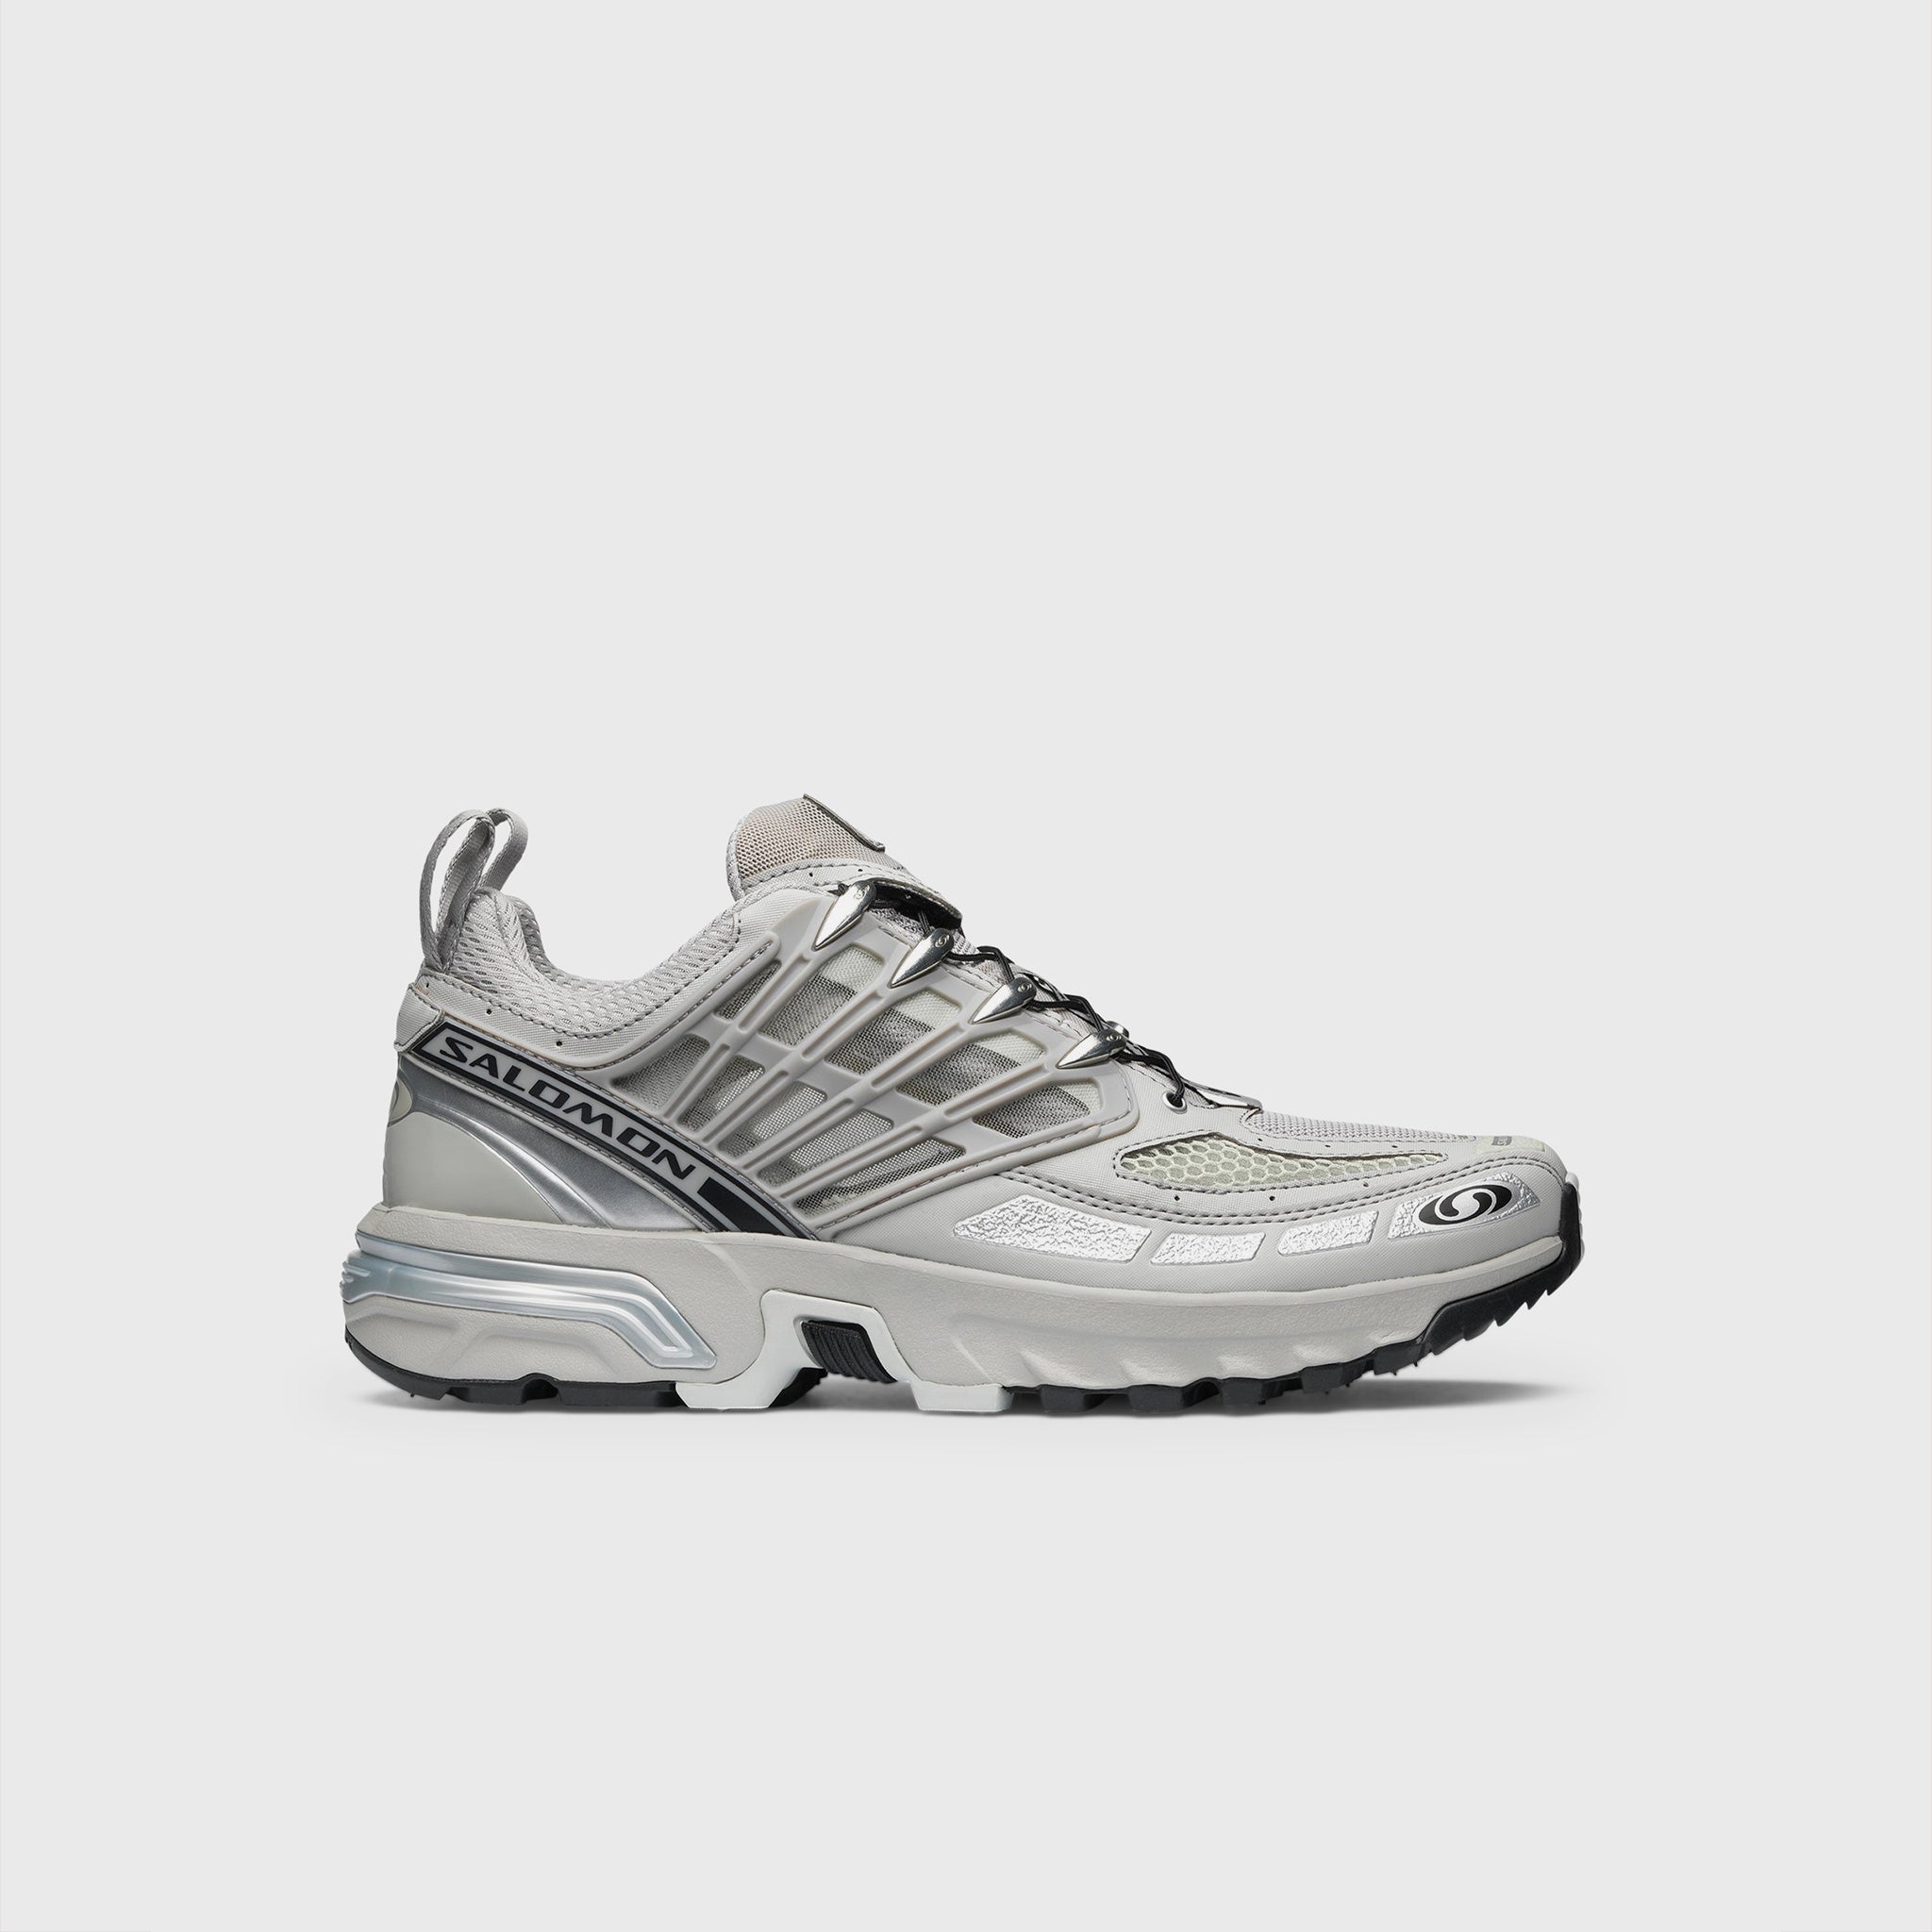 Silver Metallic and grey athletic shoe featuring breathable angled openings on lateral and medial sides and a chunky gripping sole - side view.